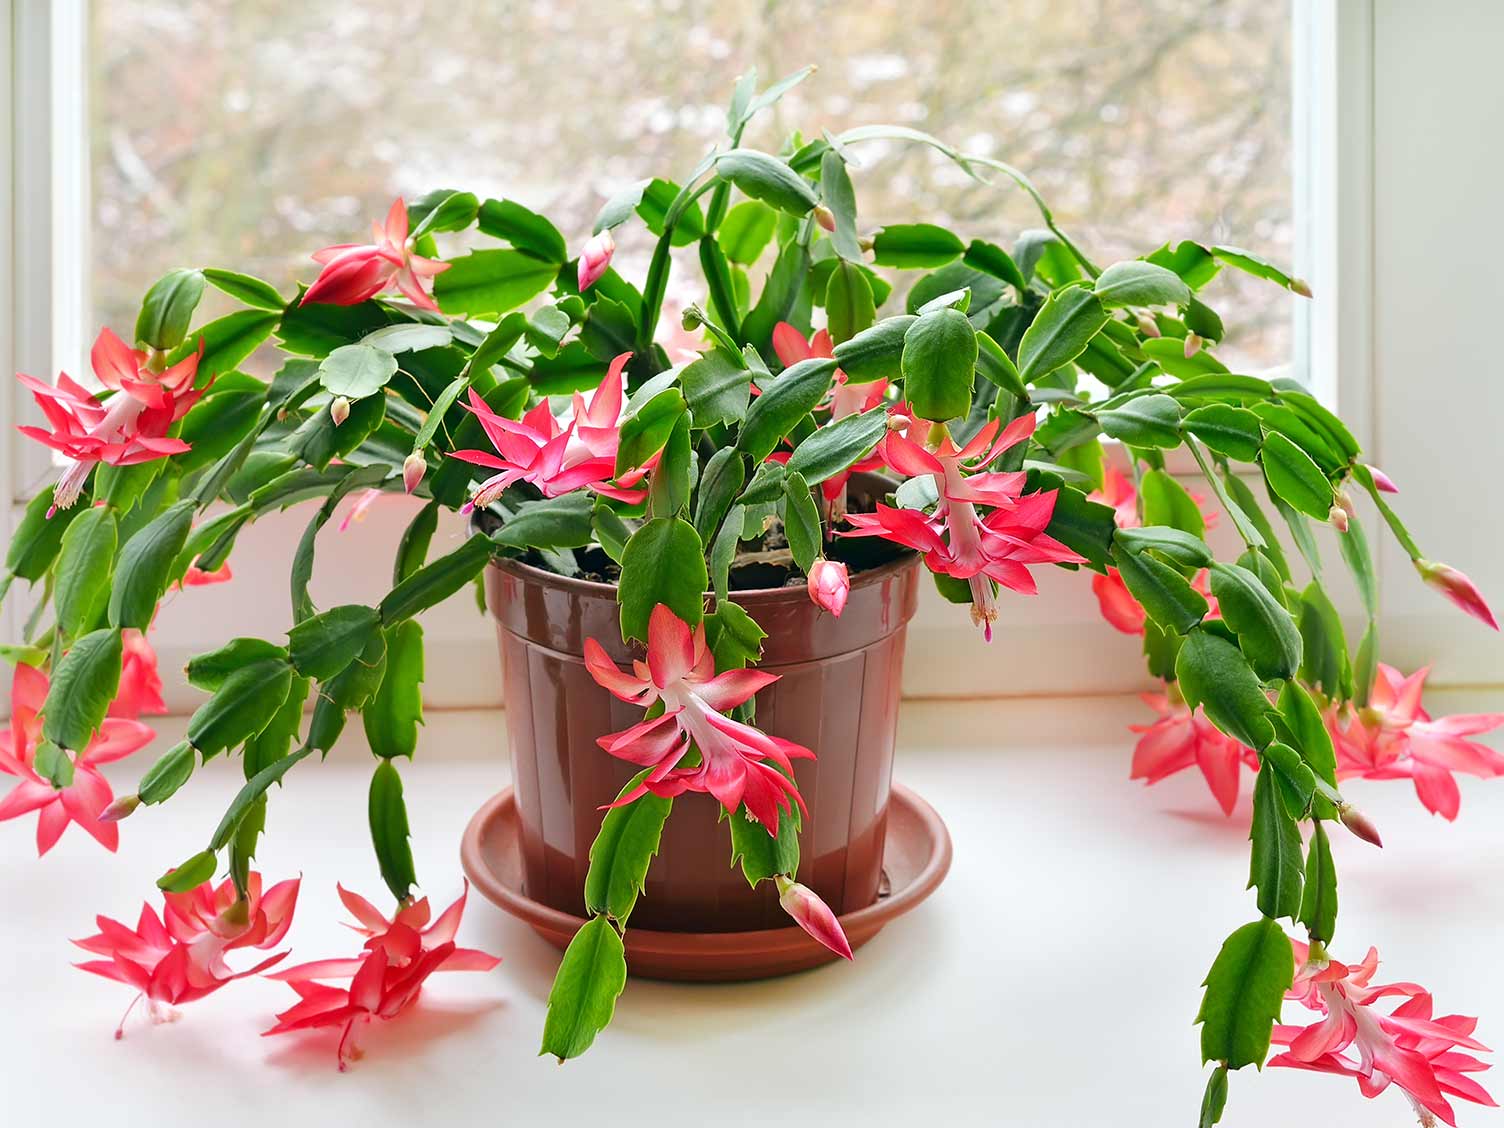 Christmas cactus in the home